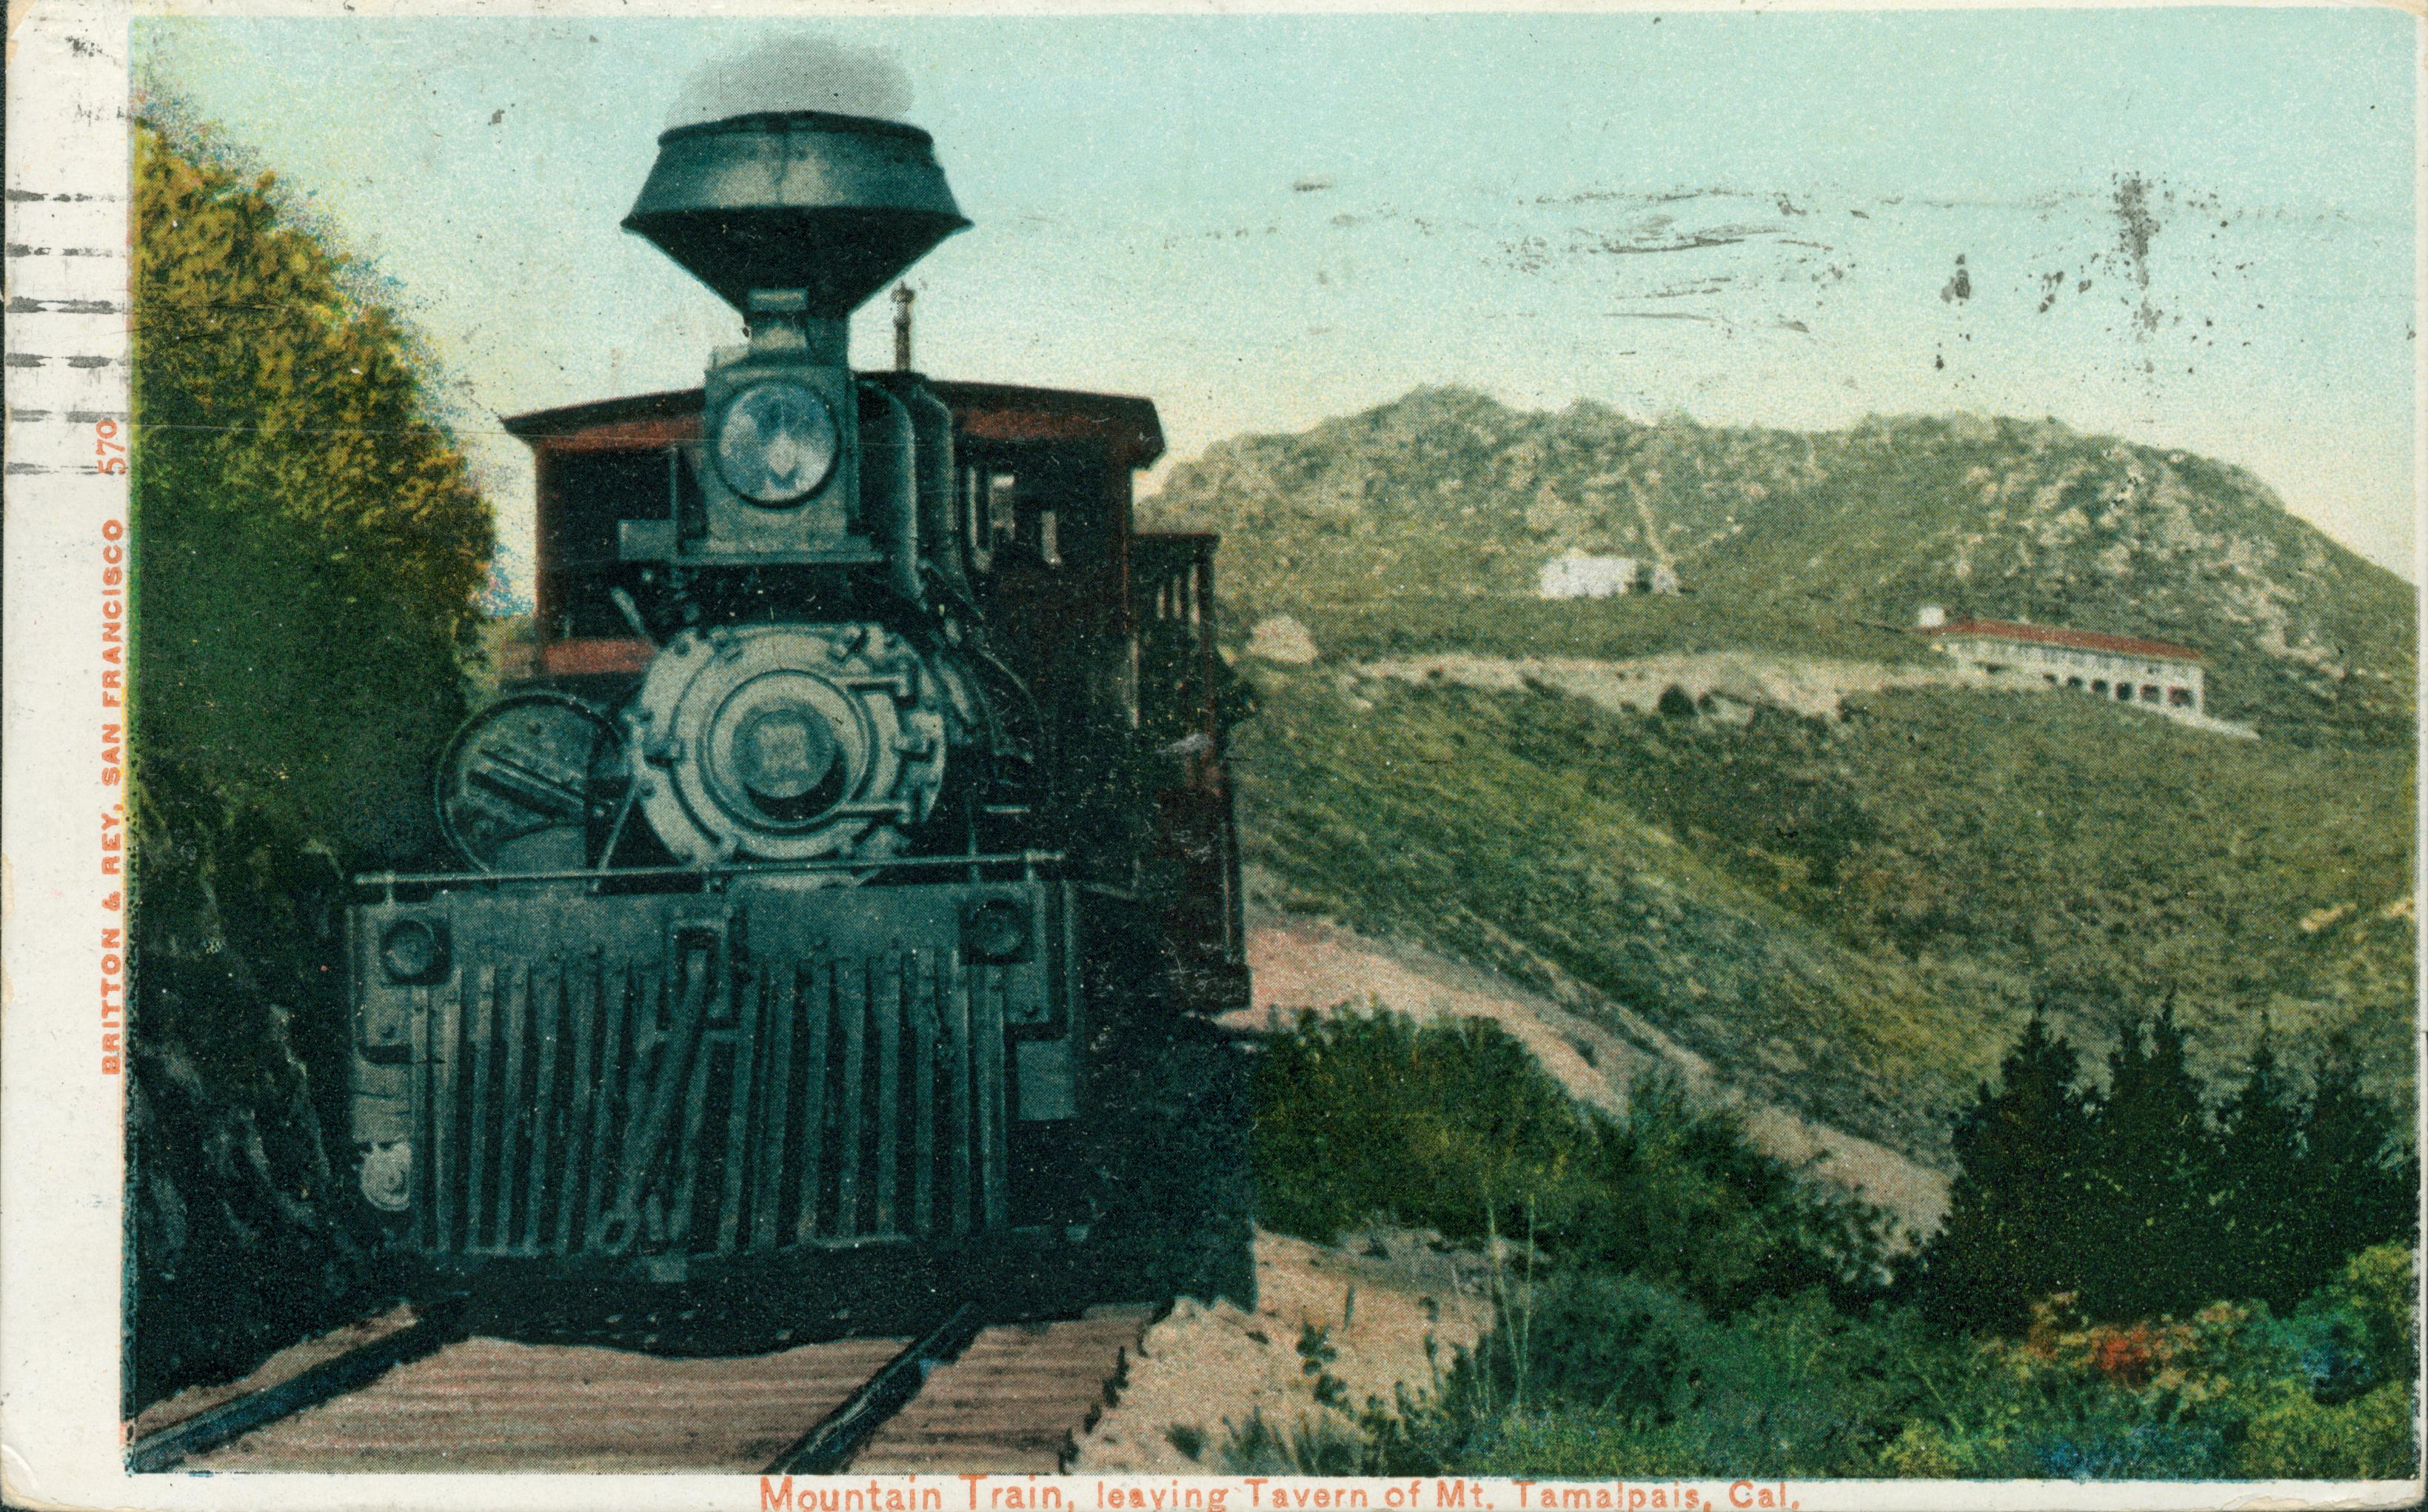 Steam engine traveling on track, building in background, mountains and hills, with shrubbery in background